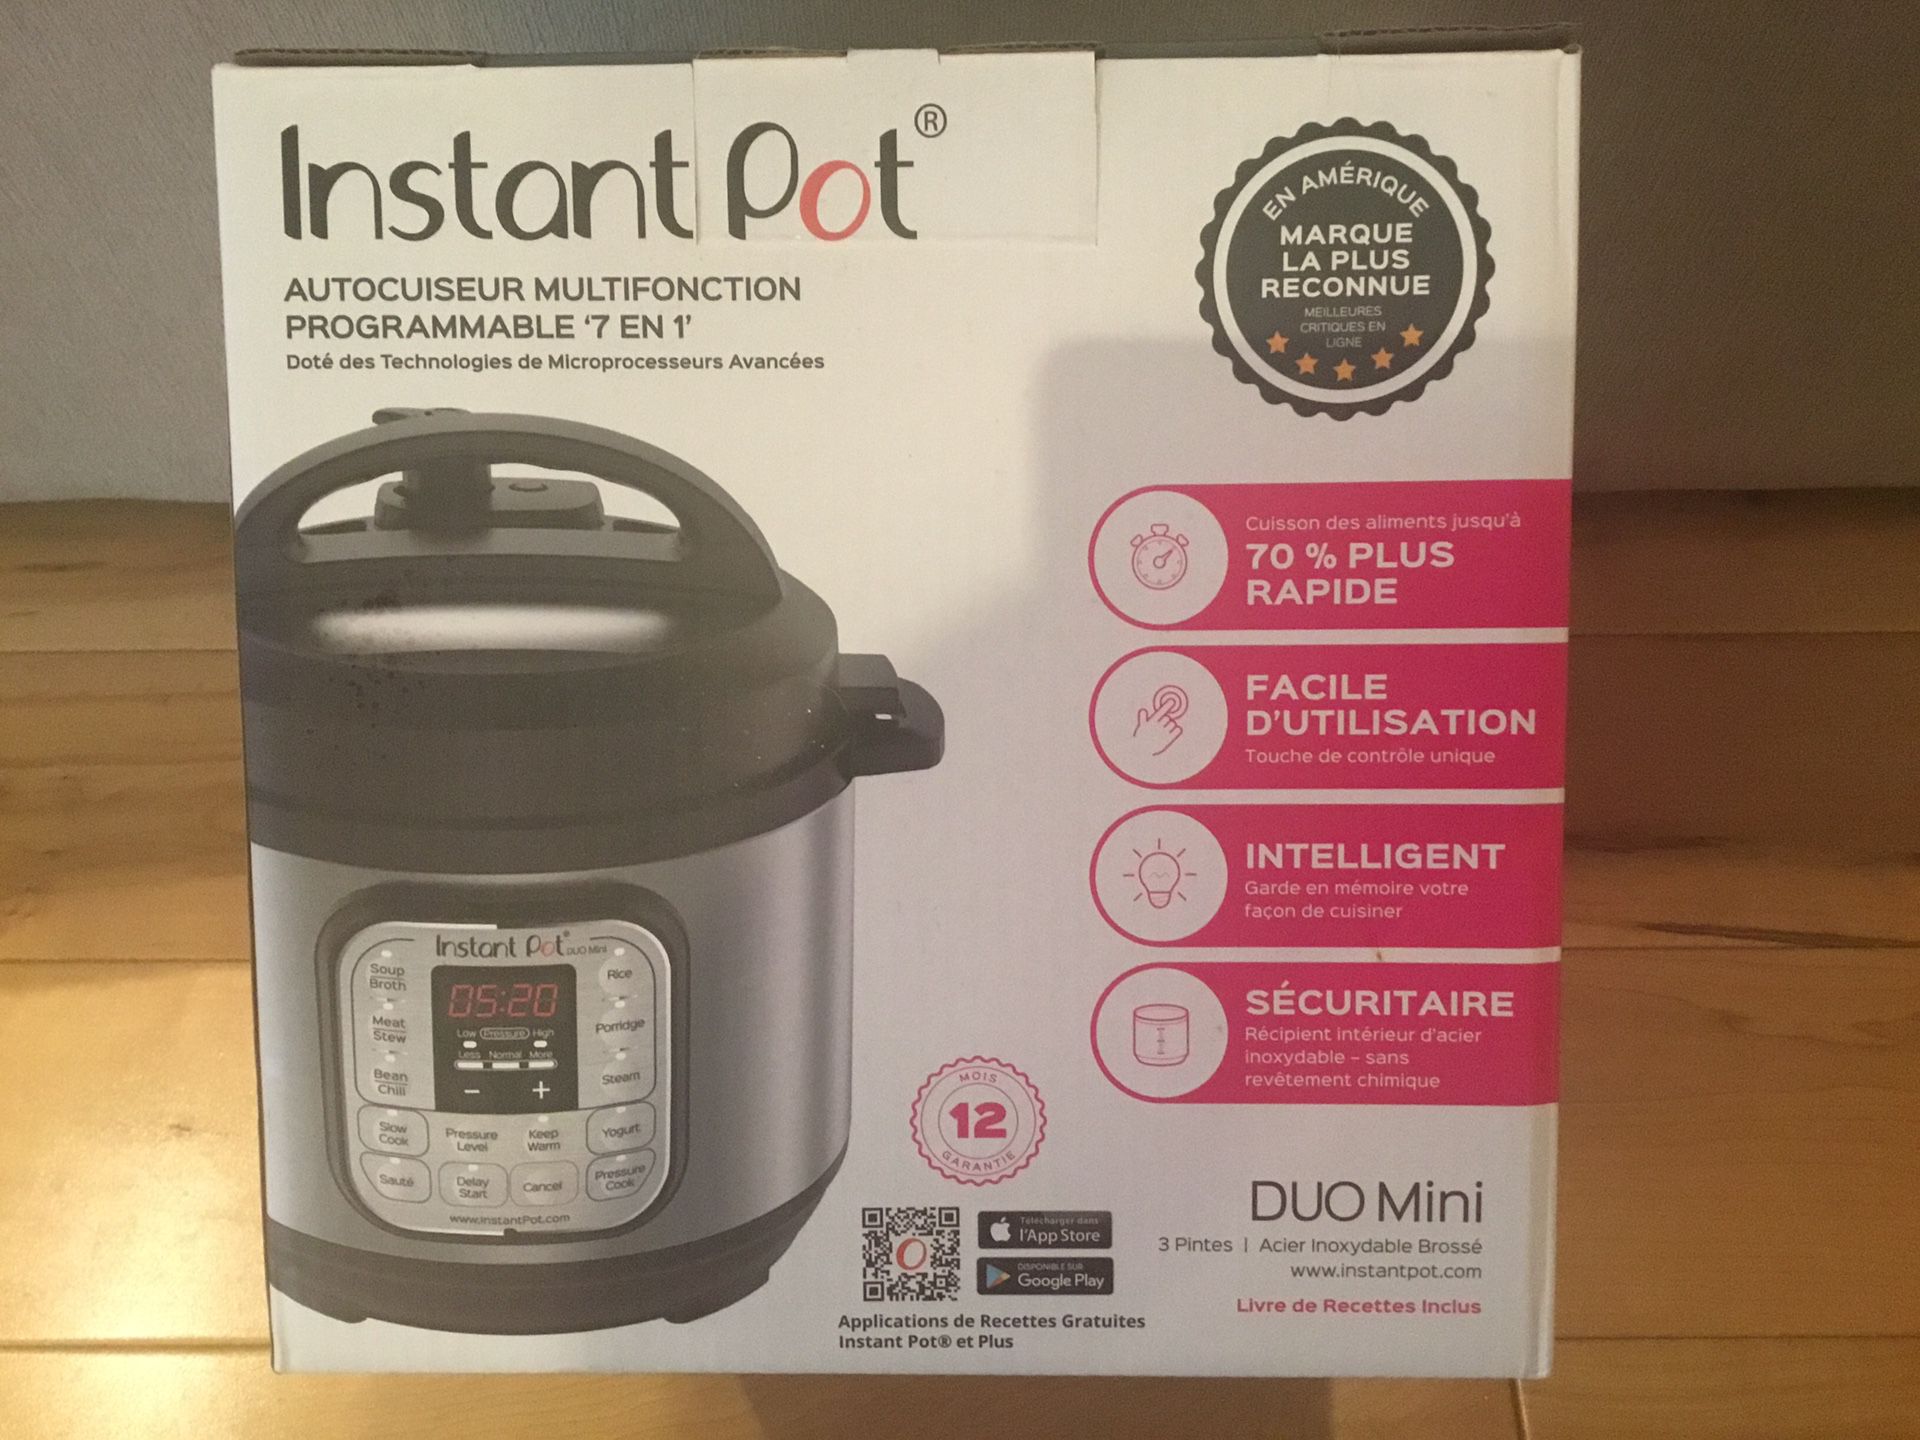 Instant Pot - Brand New Condition! Great gift for the holidays.